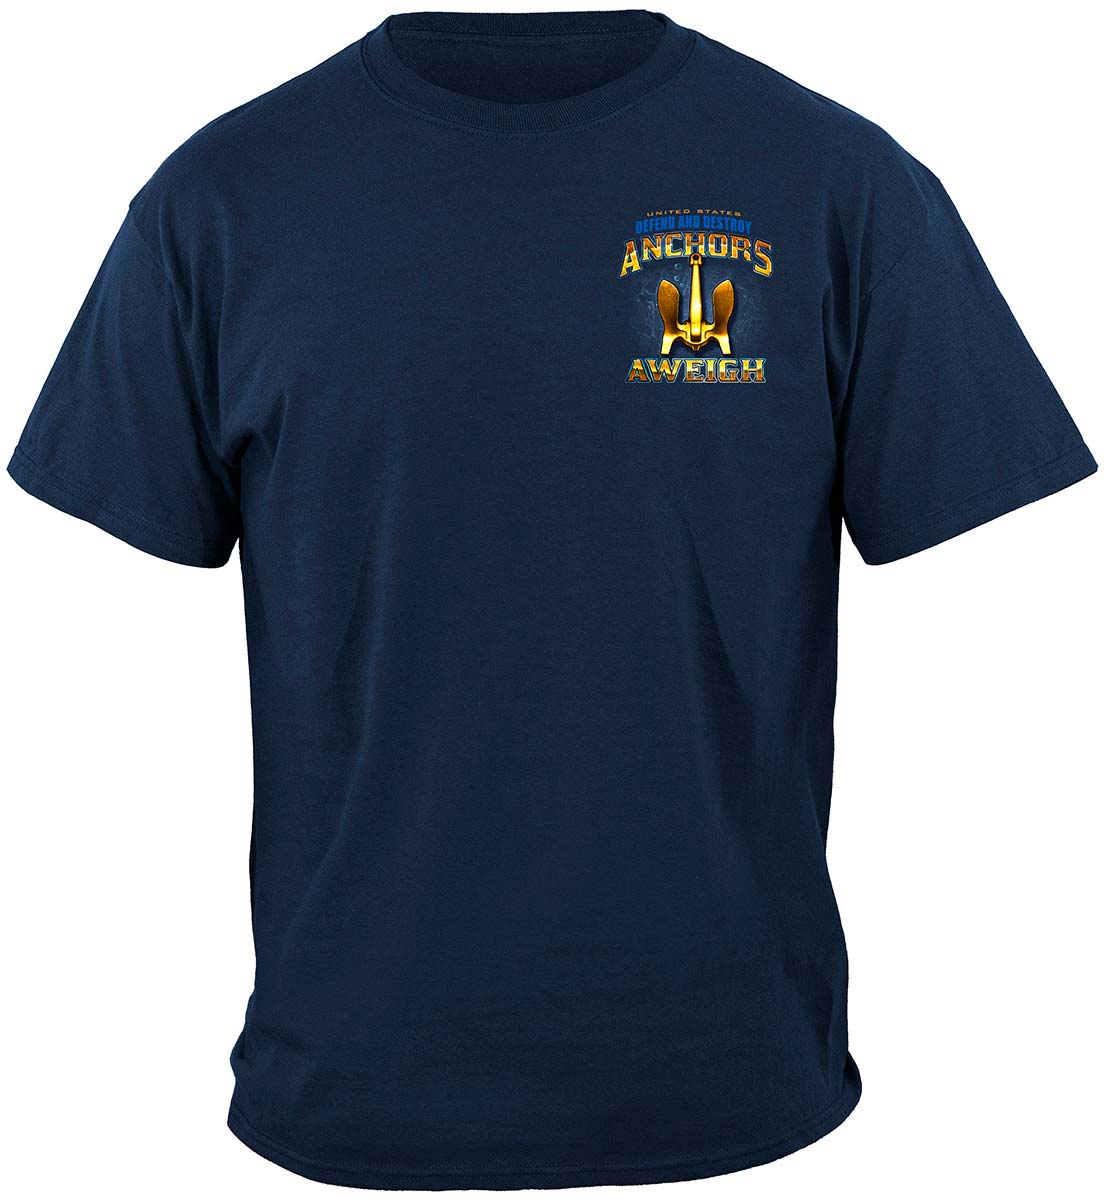 US NAVY Anchors Aweigh Defend And Destroy Premium Long Sleeves